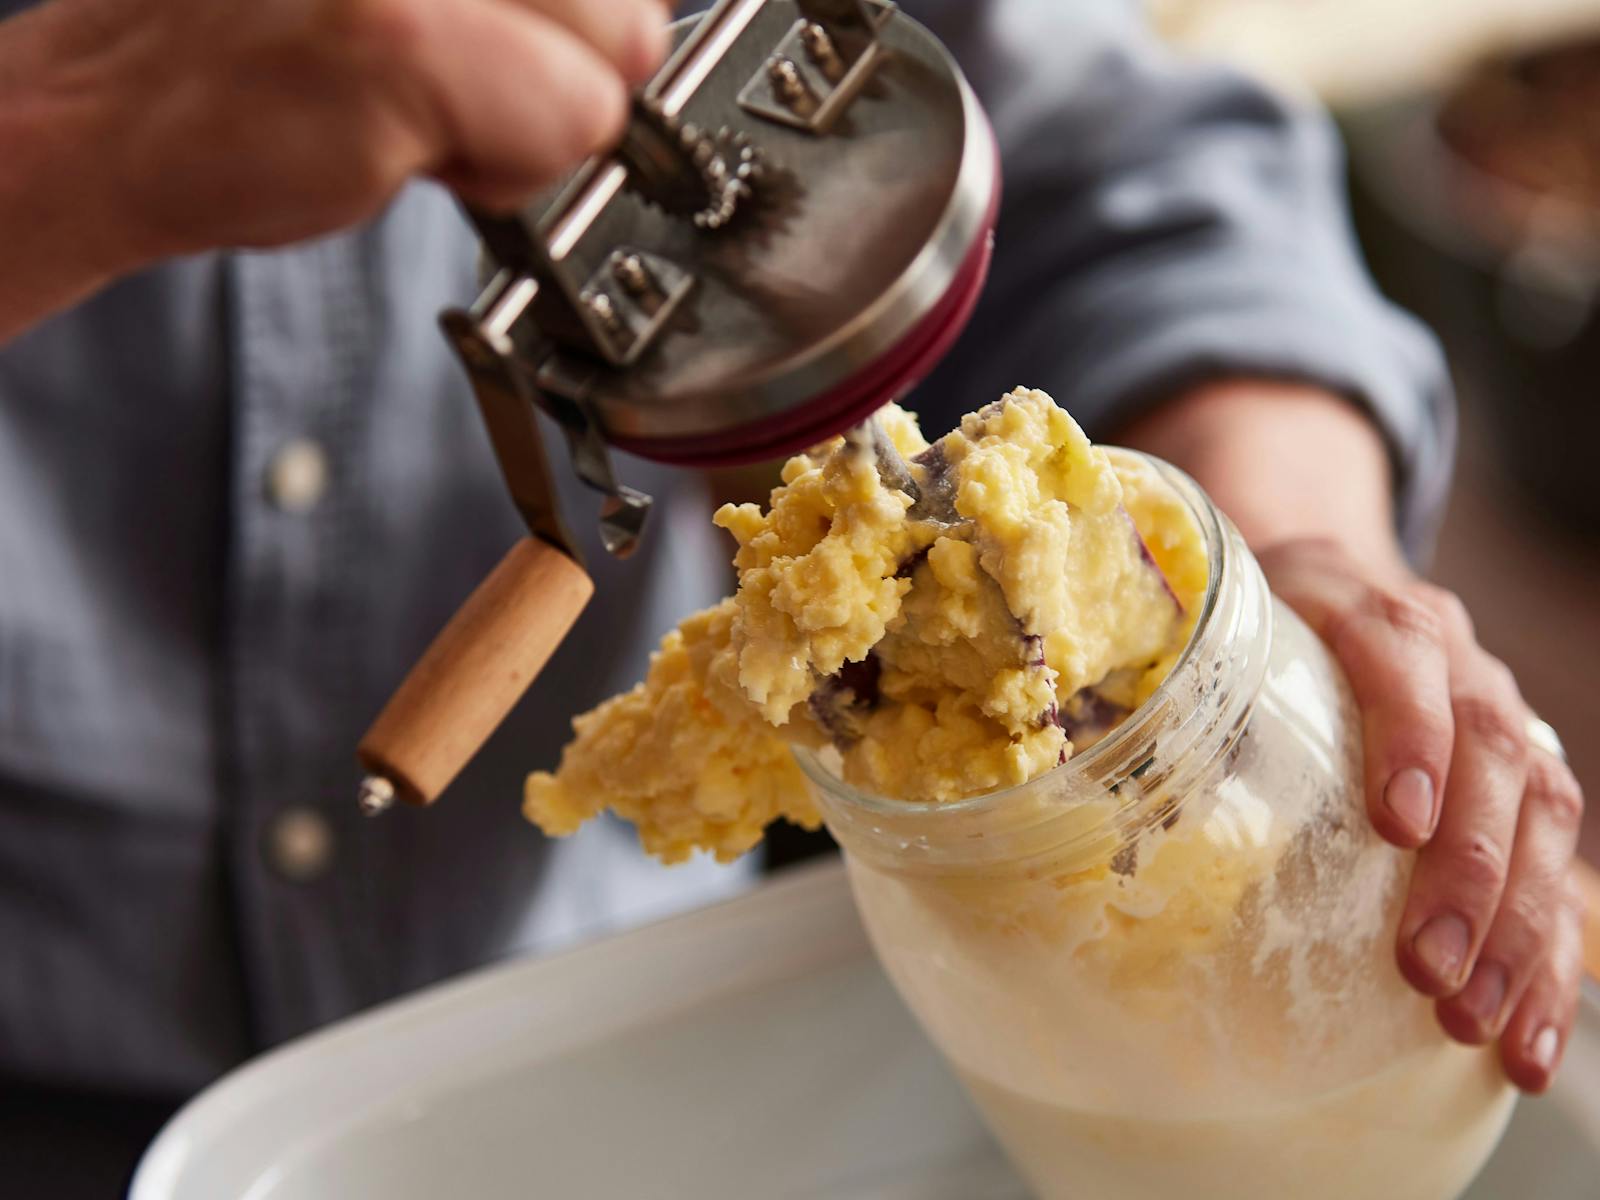 marvel at the churning of cream into your very own butter to take home and enjoy